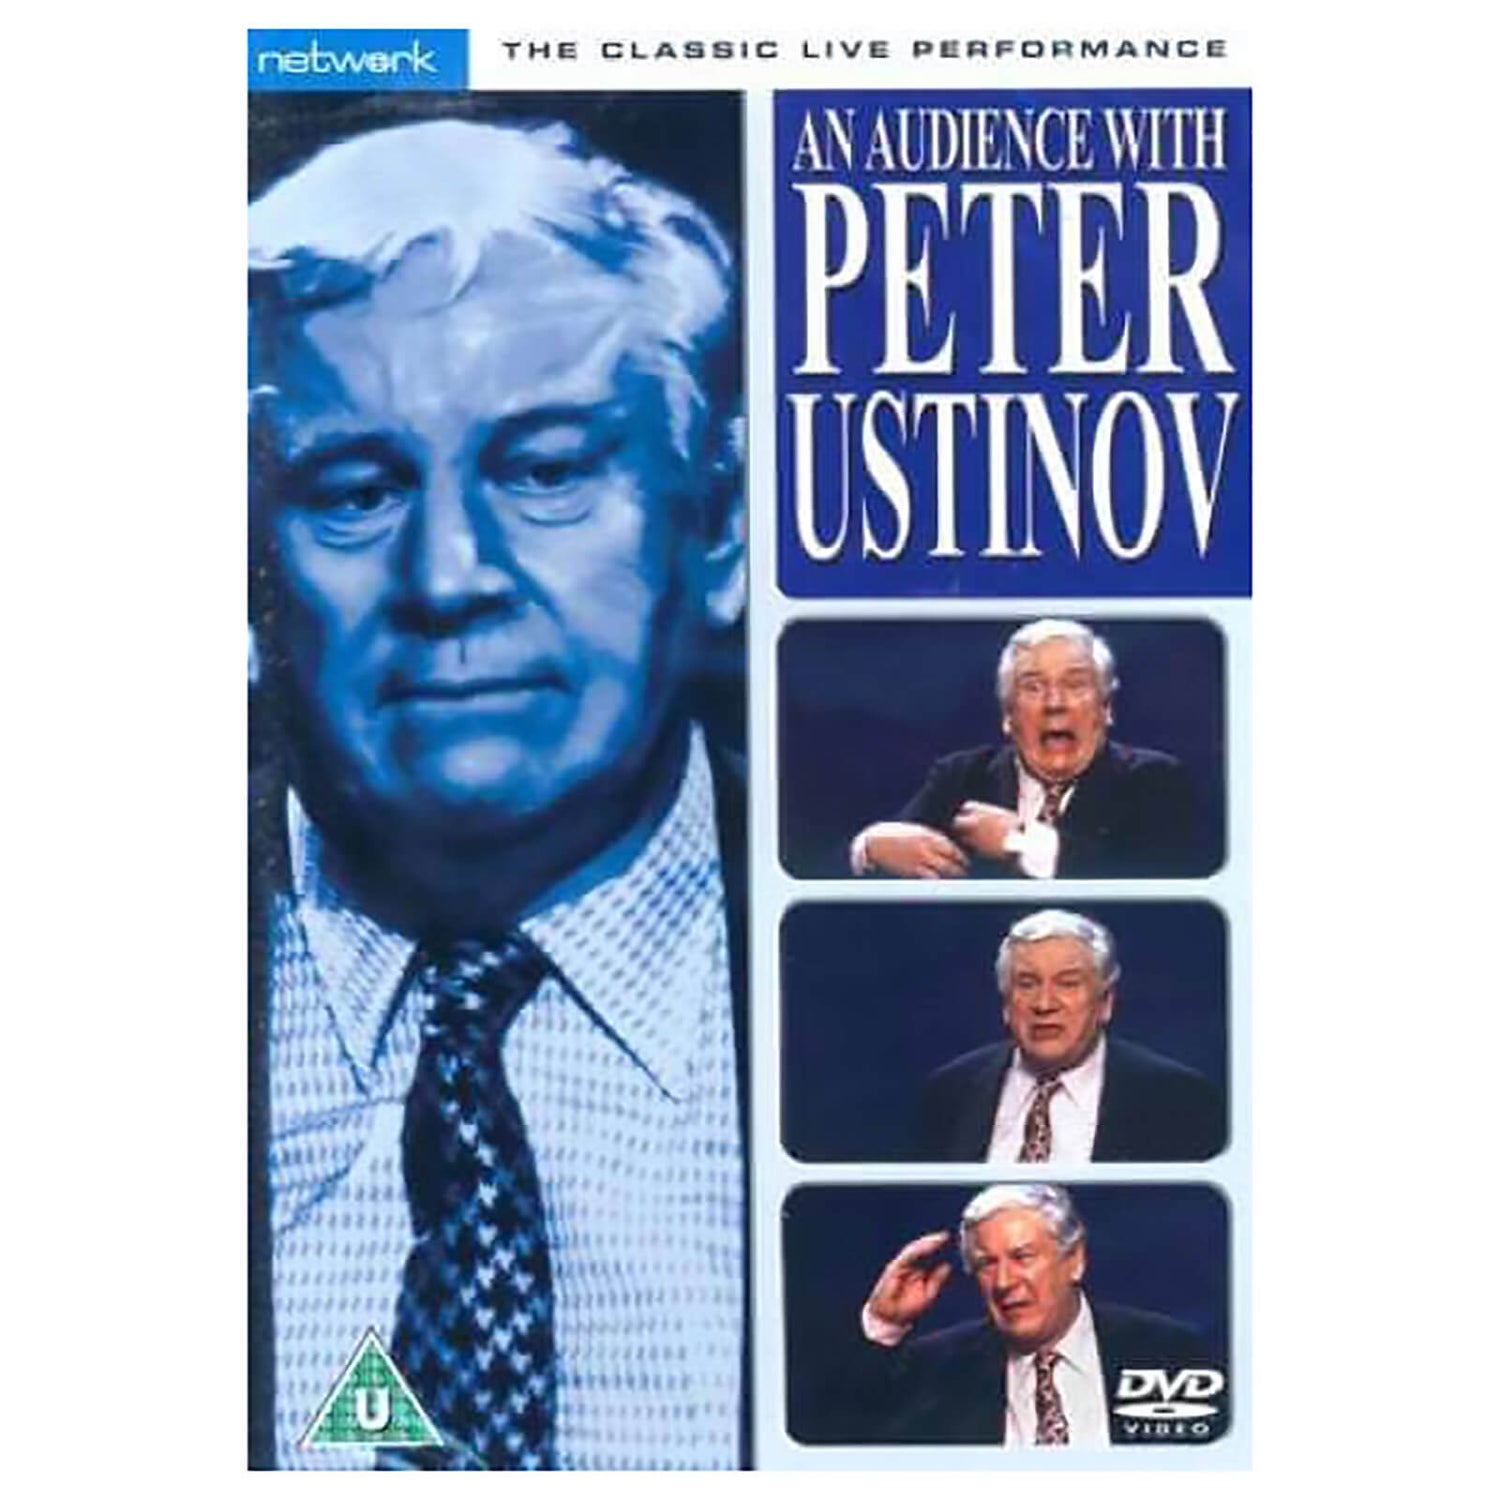 An Audience With Peter Ustinov